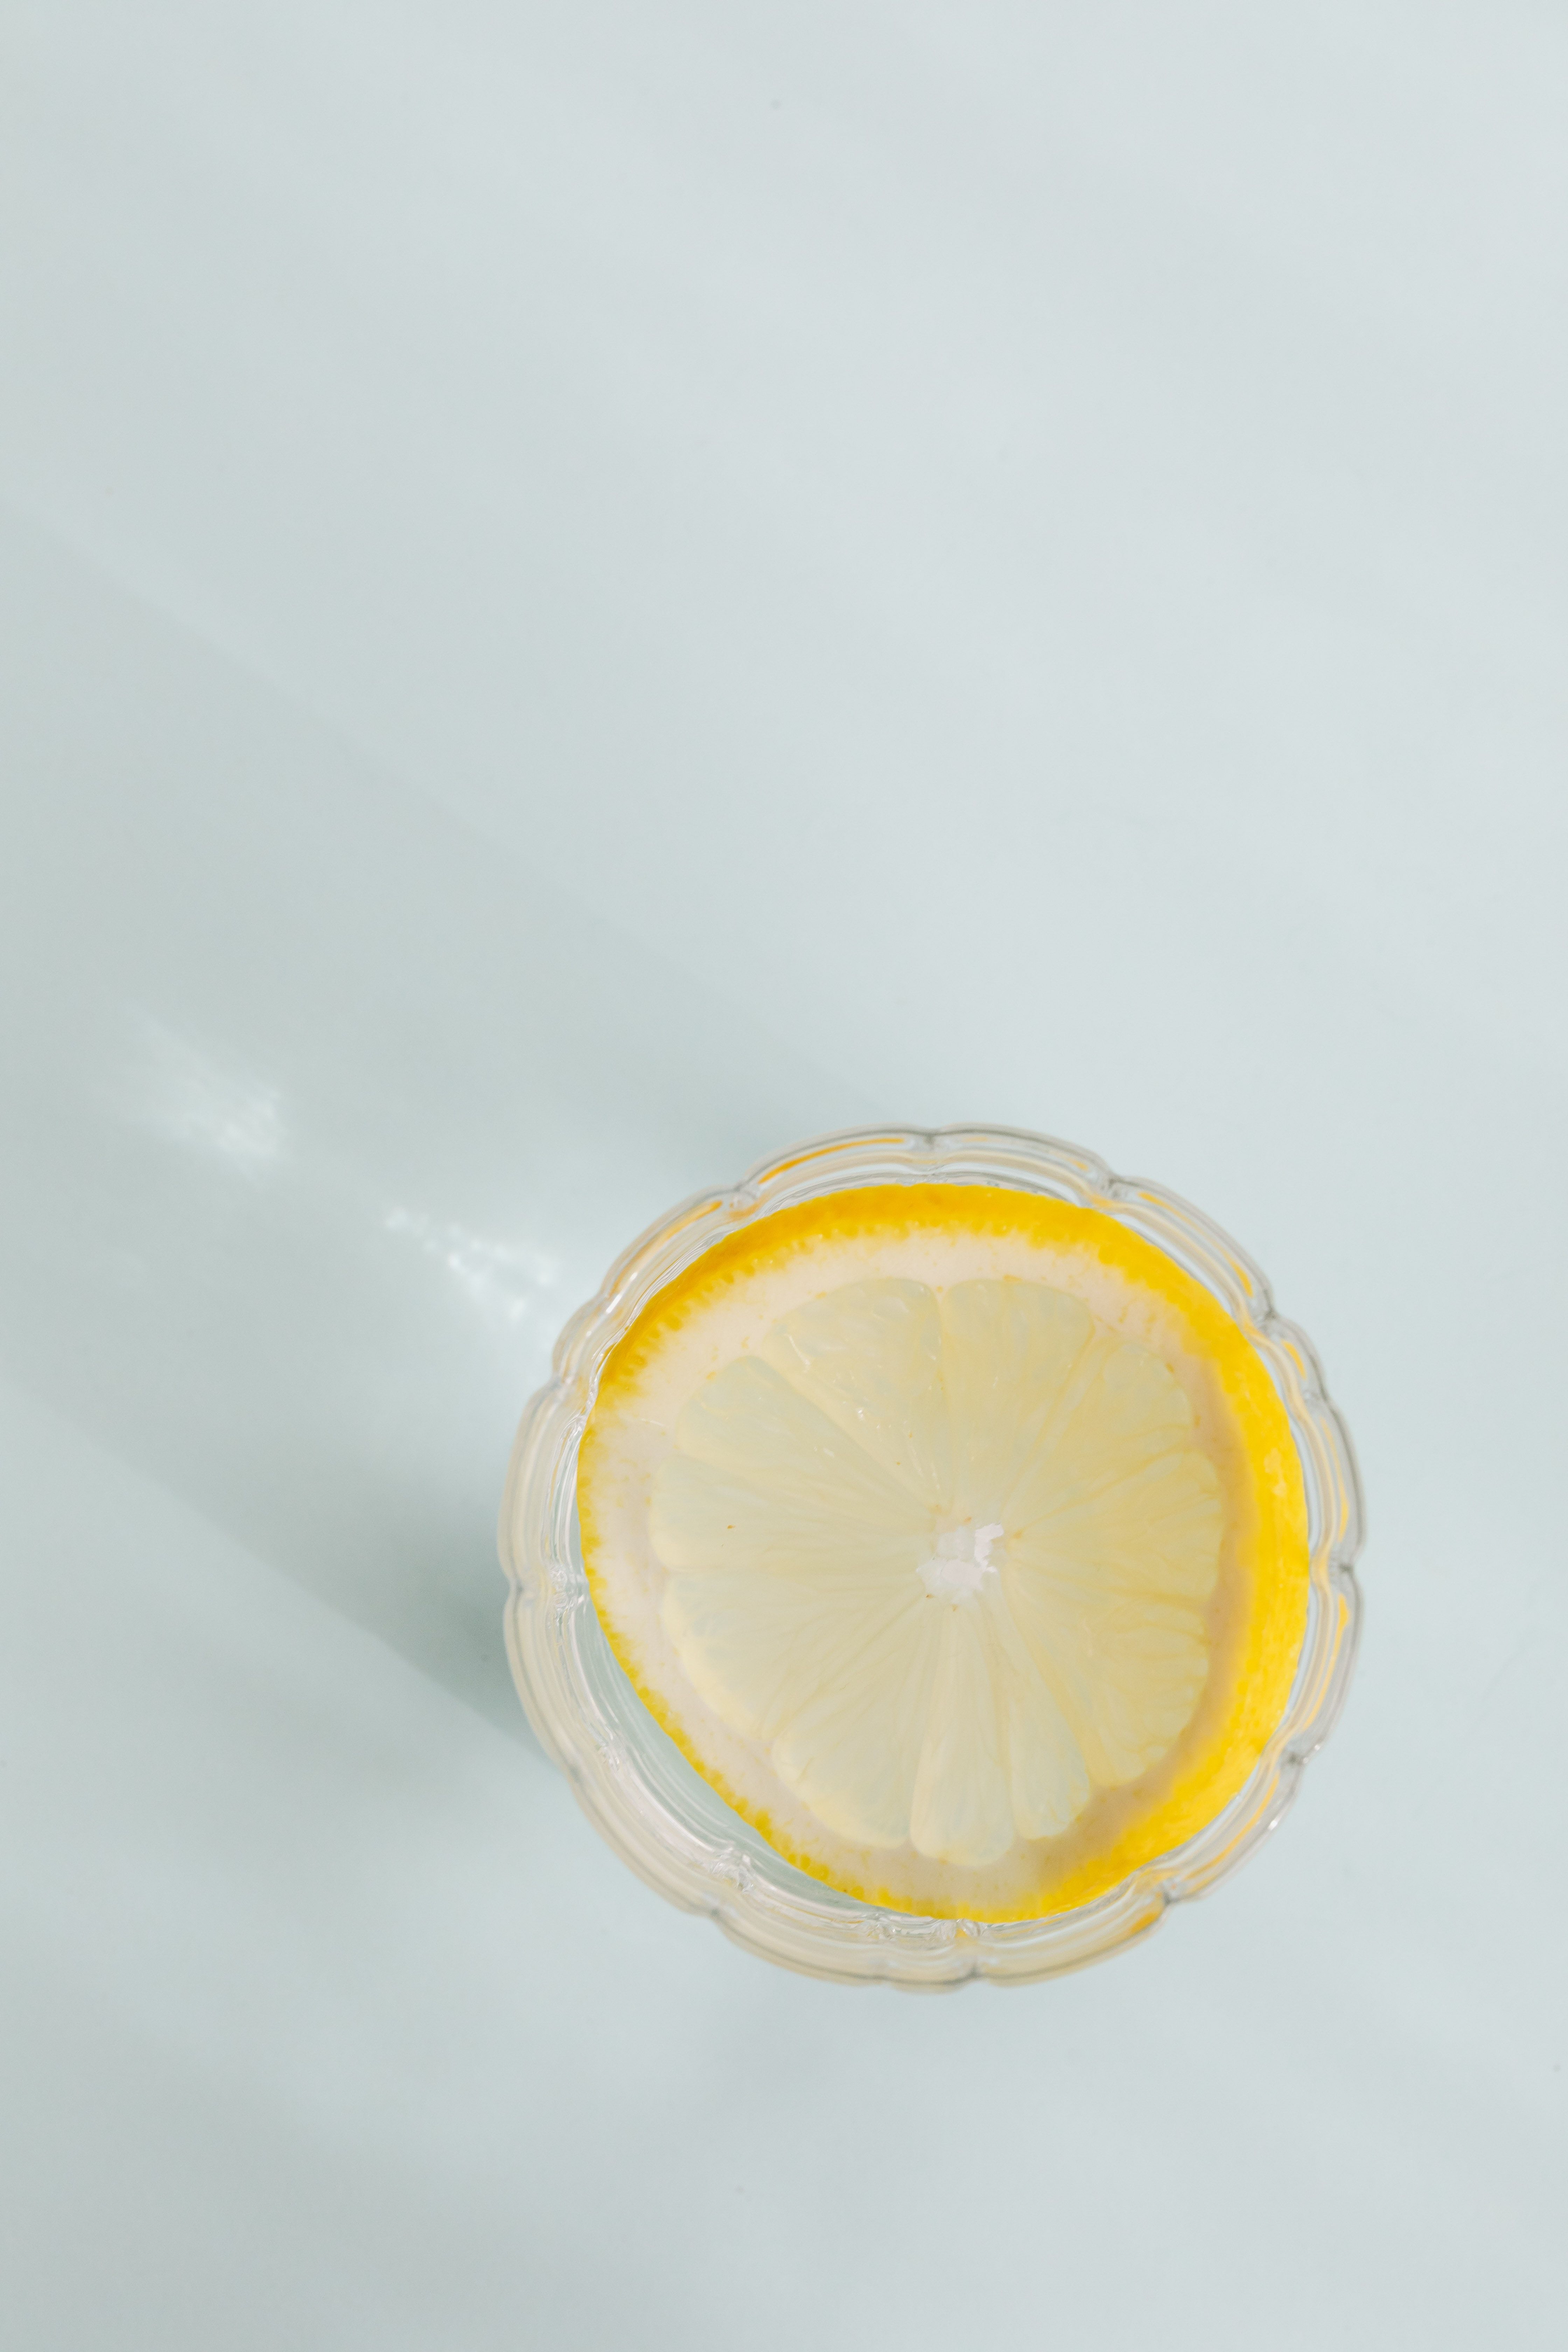 Glass with lemon drink on white background · Free